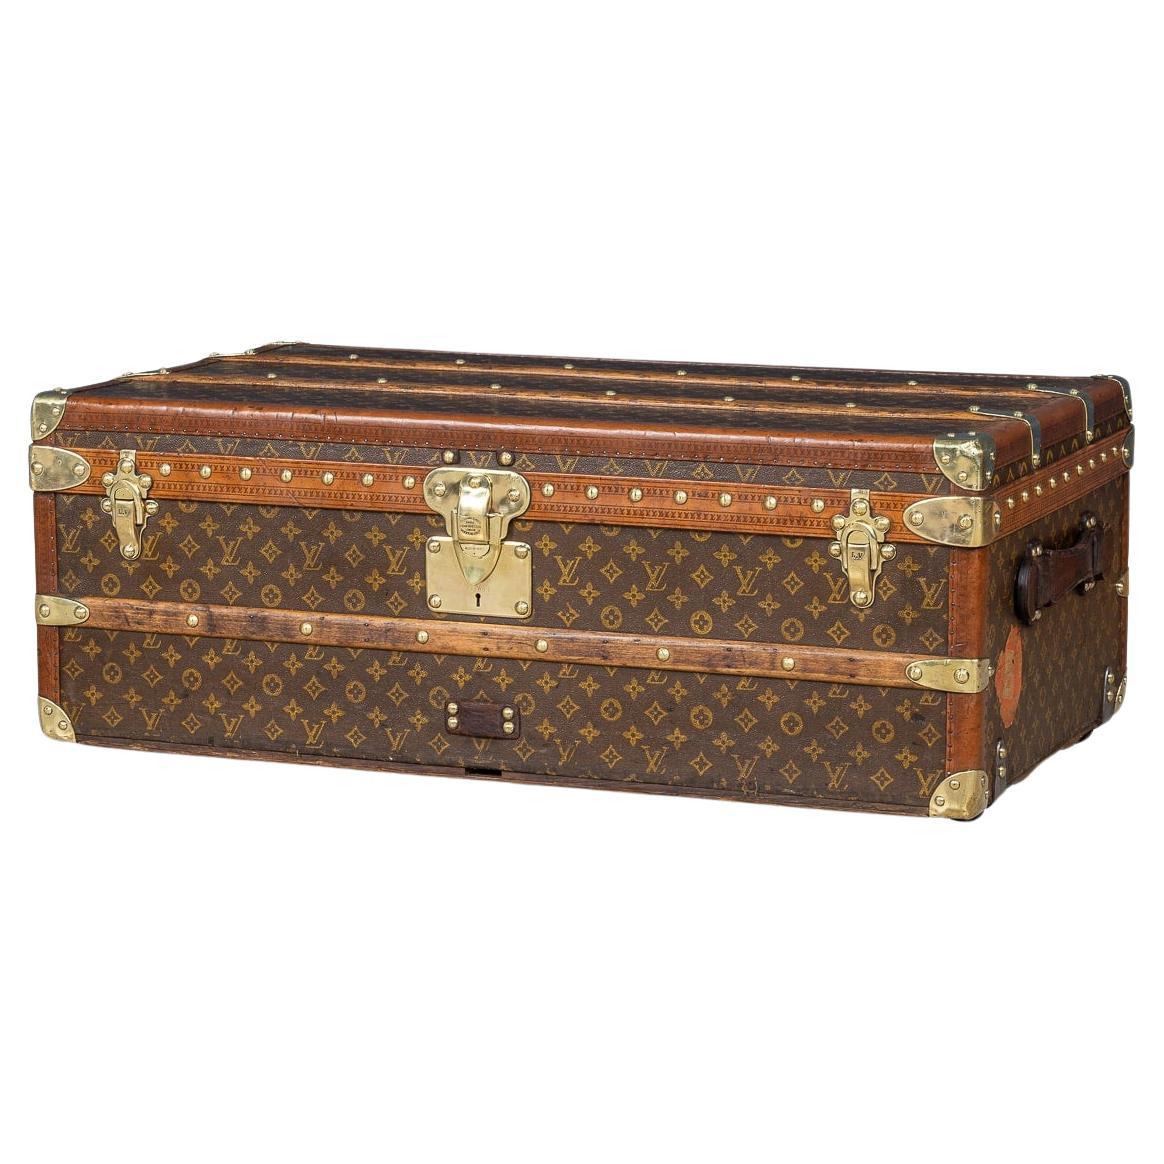 20th Century Louis Vuitton Cabin Trunk In Monogram Canvas, France c.1930 For Sale